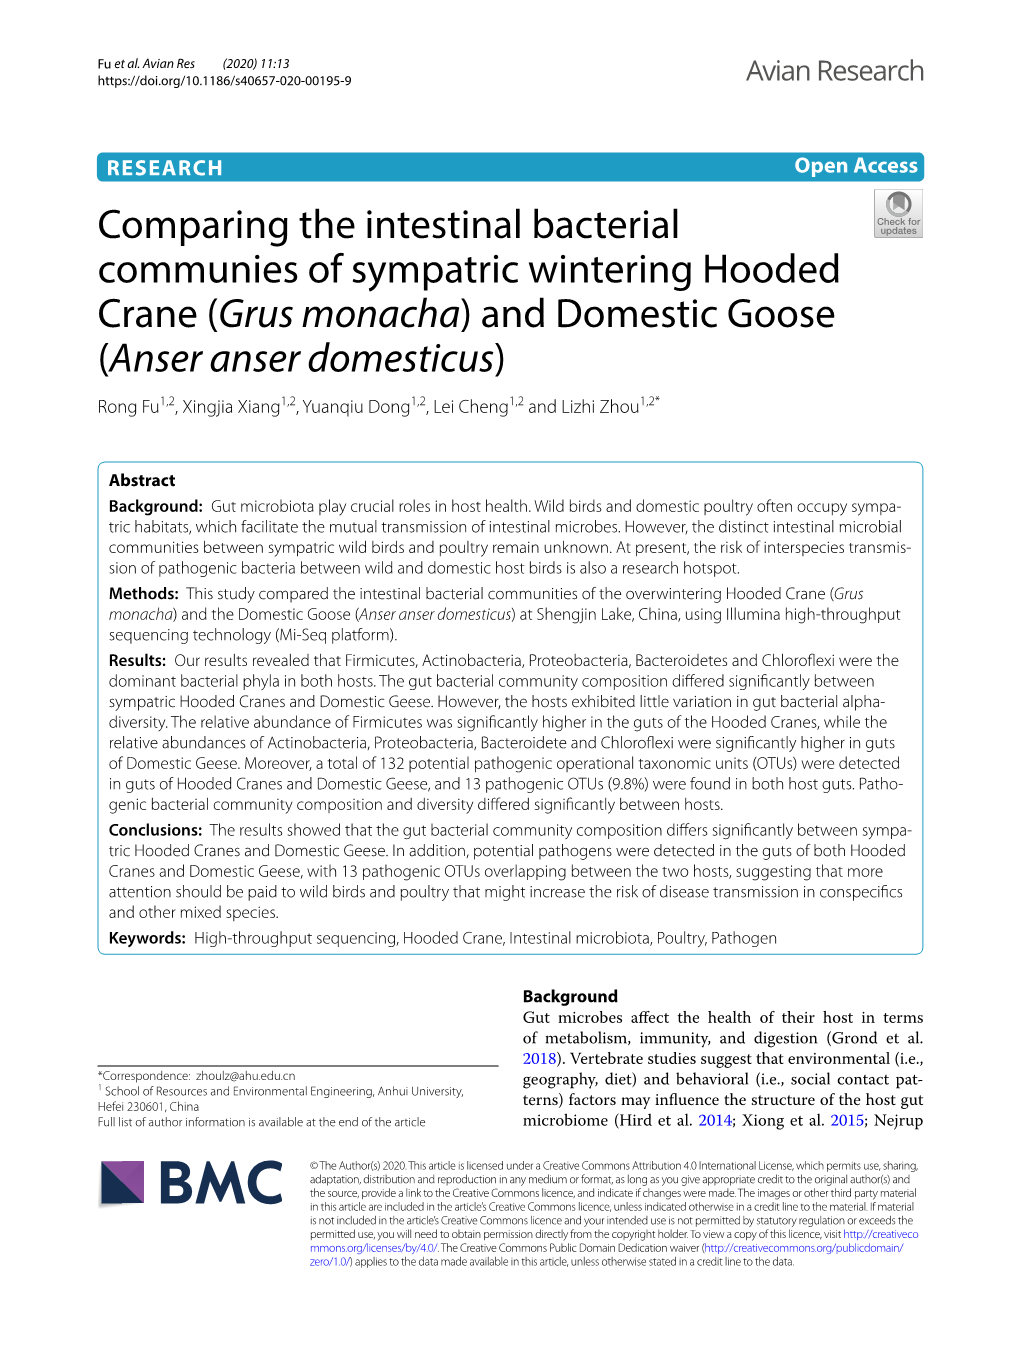 Comparing the Intestinal Bacterial Communies of Sympatric Wintering